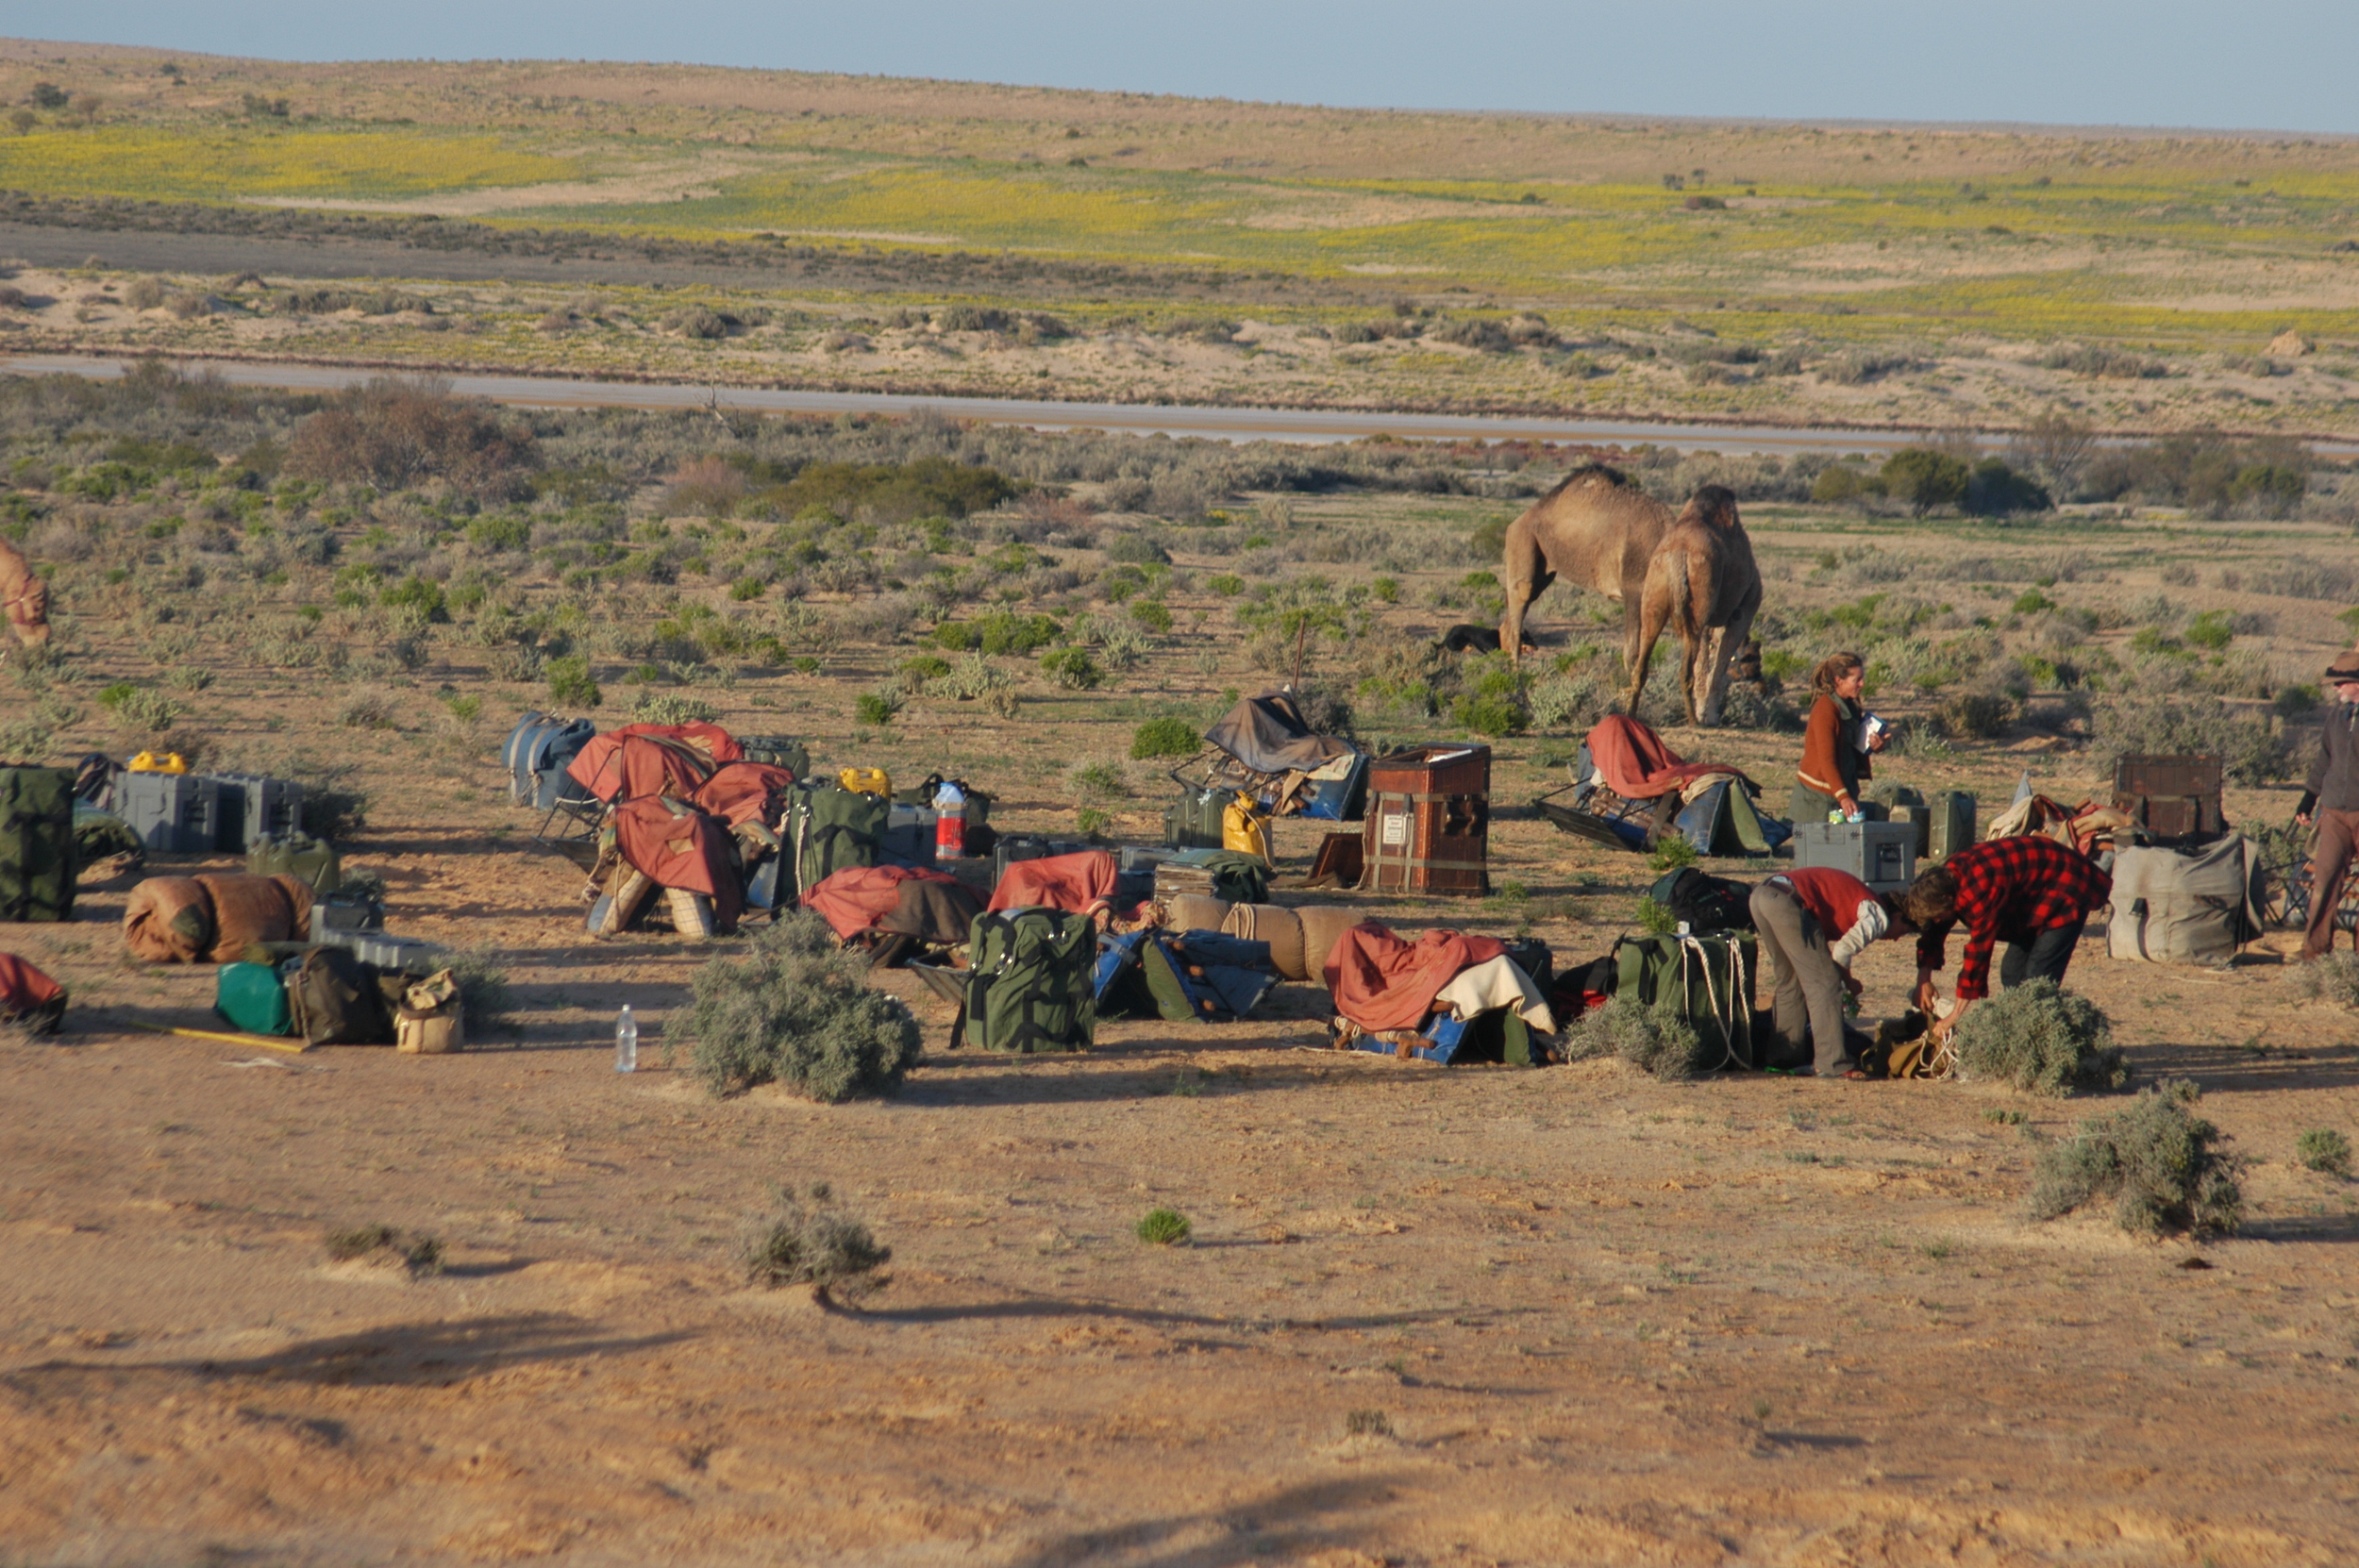 Typical camp on the Arid Rivers Expedition.